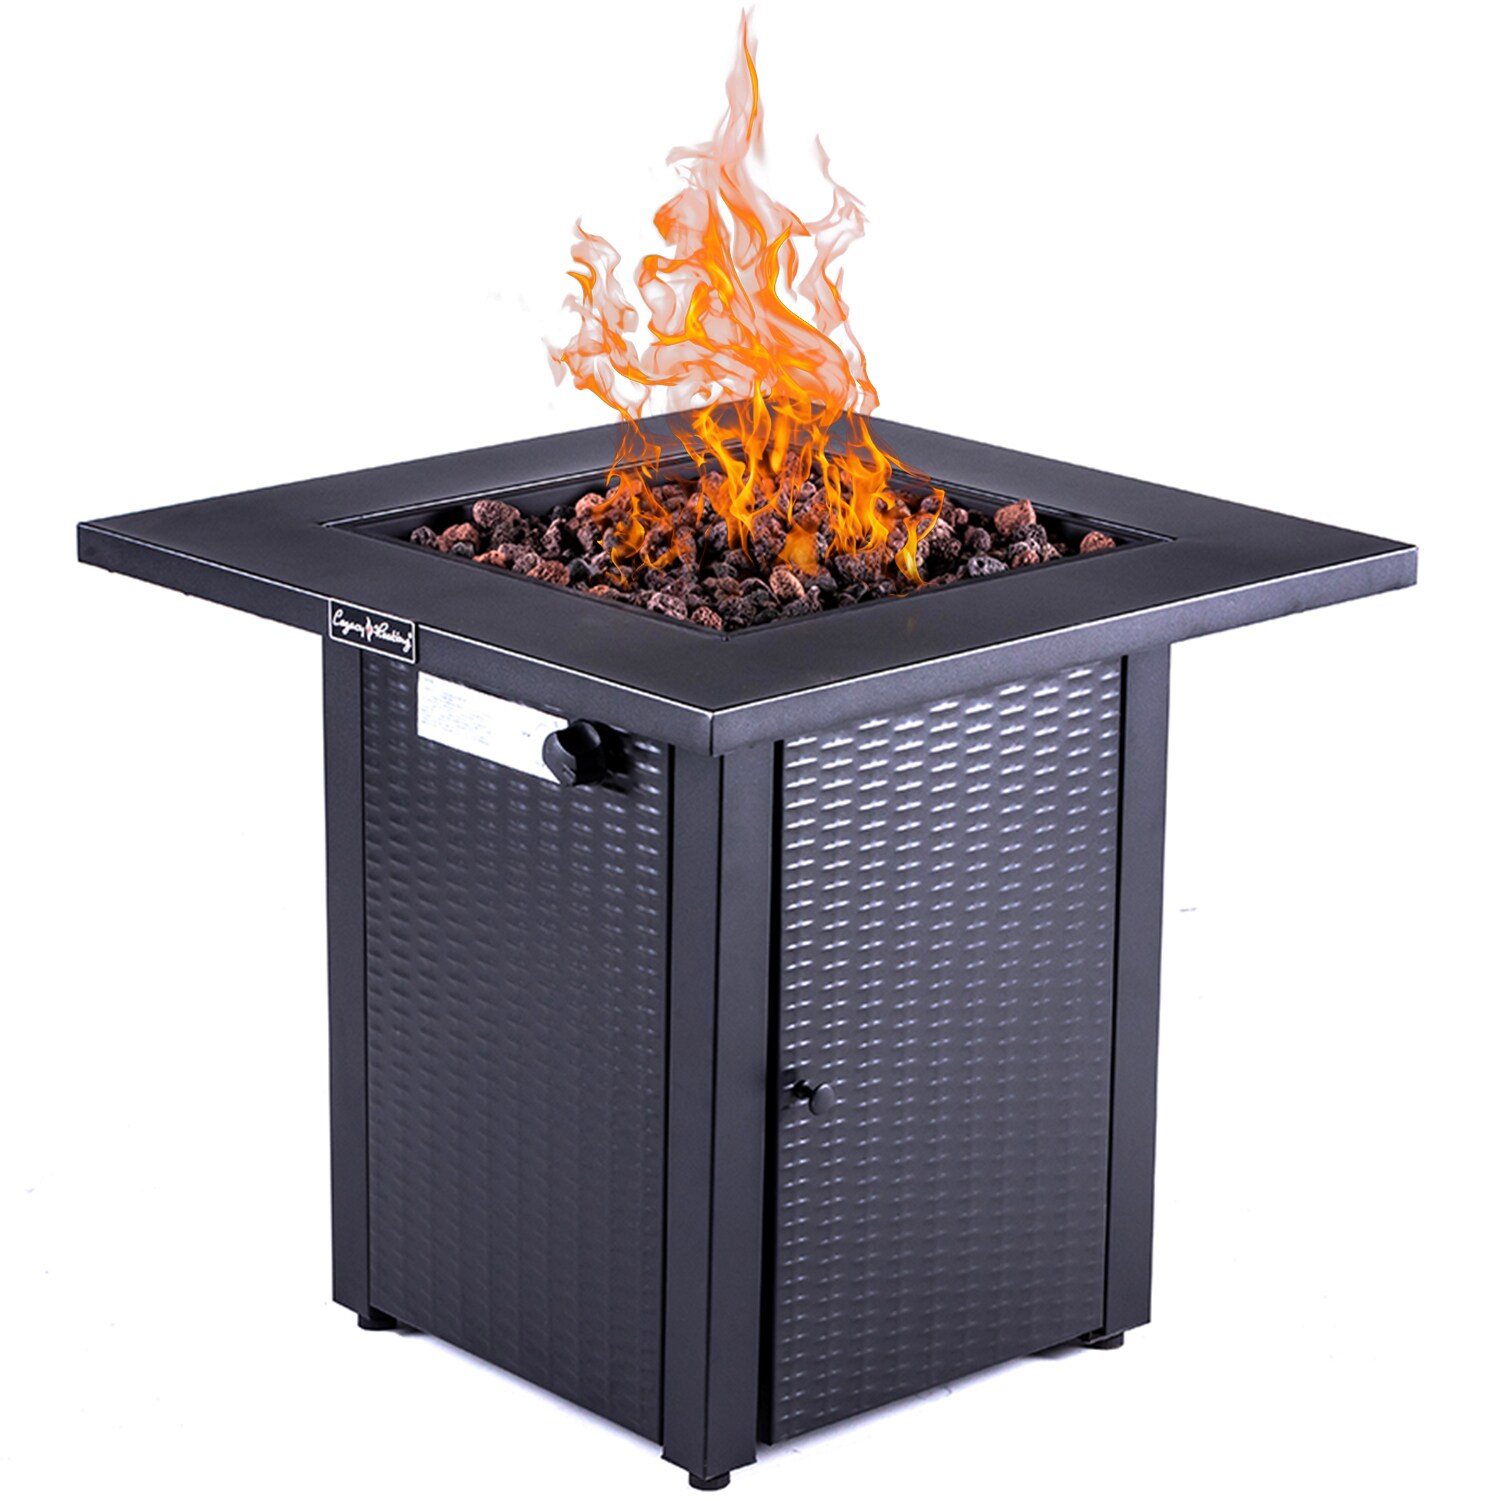 LEGACY HEATING 28 Inch Outdoor Gas Propane Fire Pit Table 